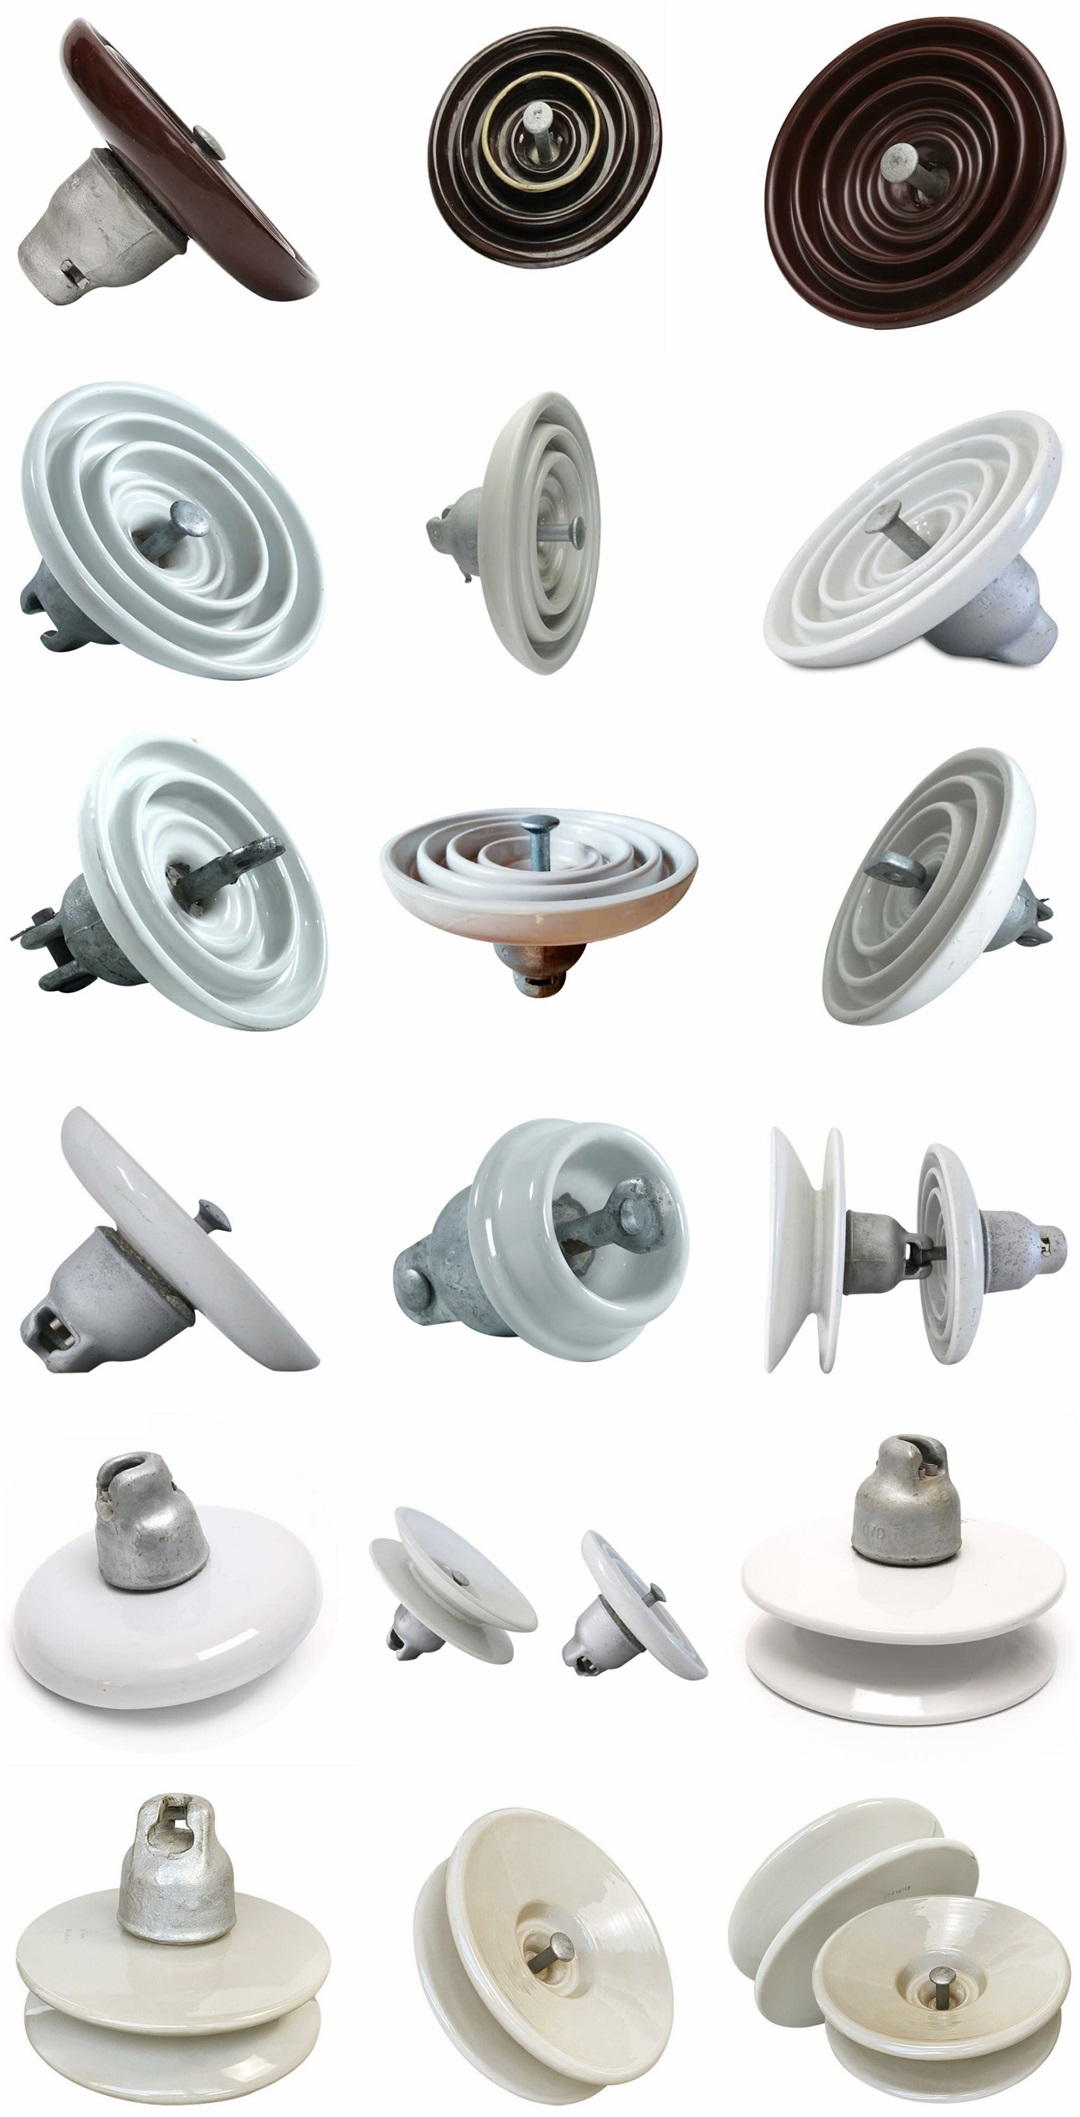 High voltage suspended porcelain insulator for power overhead lines